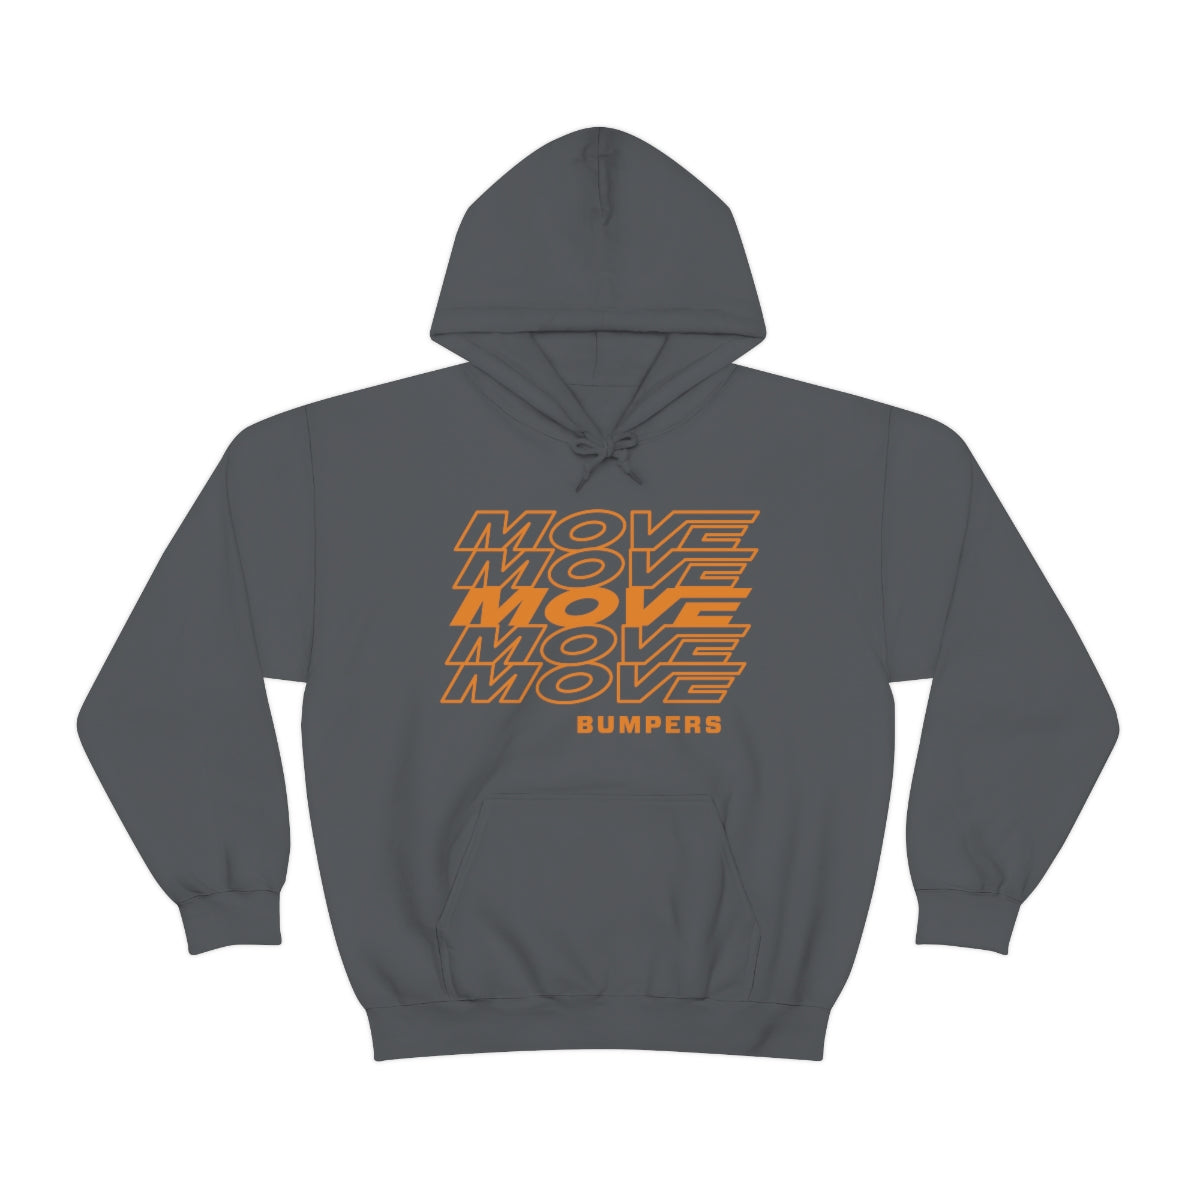 MOVE - MOVE Bumpers Hoodie - Charcoal